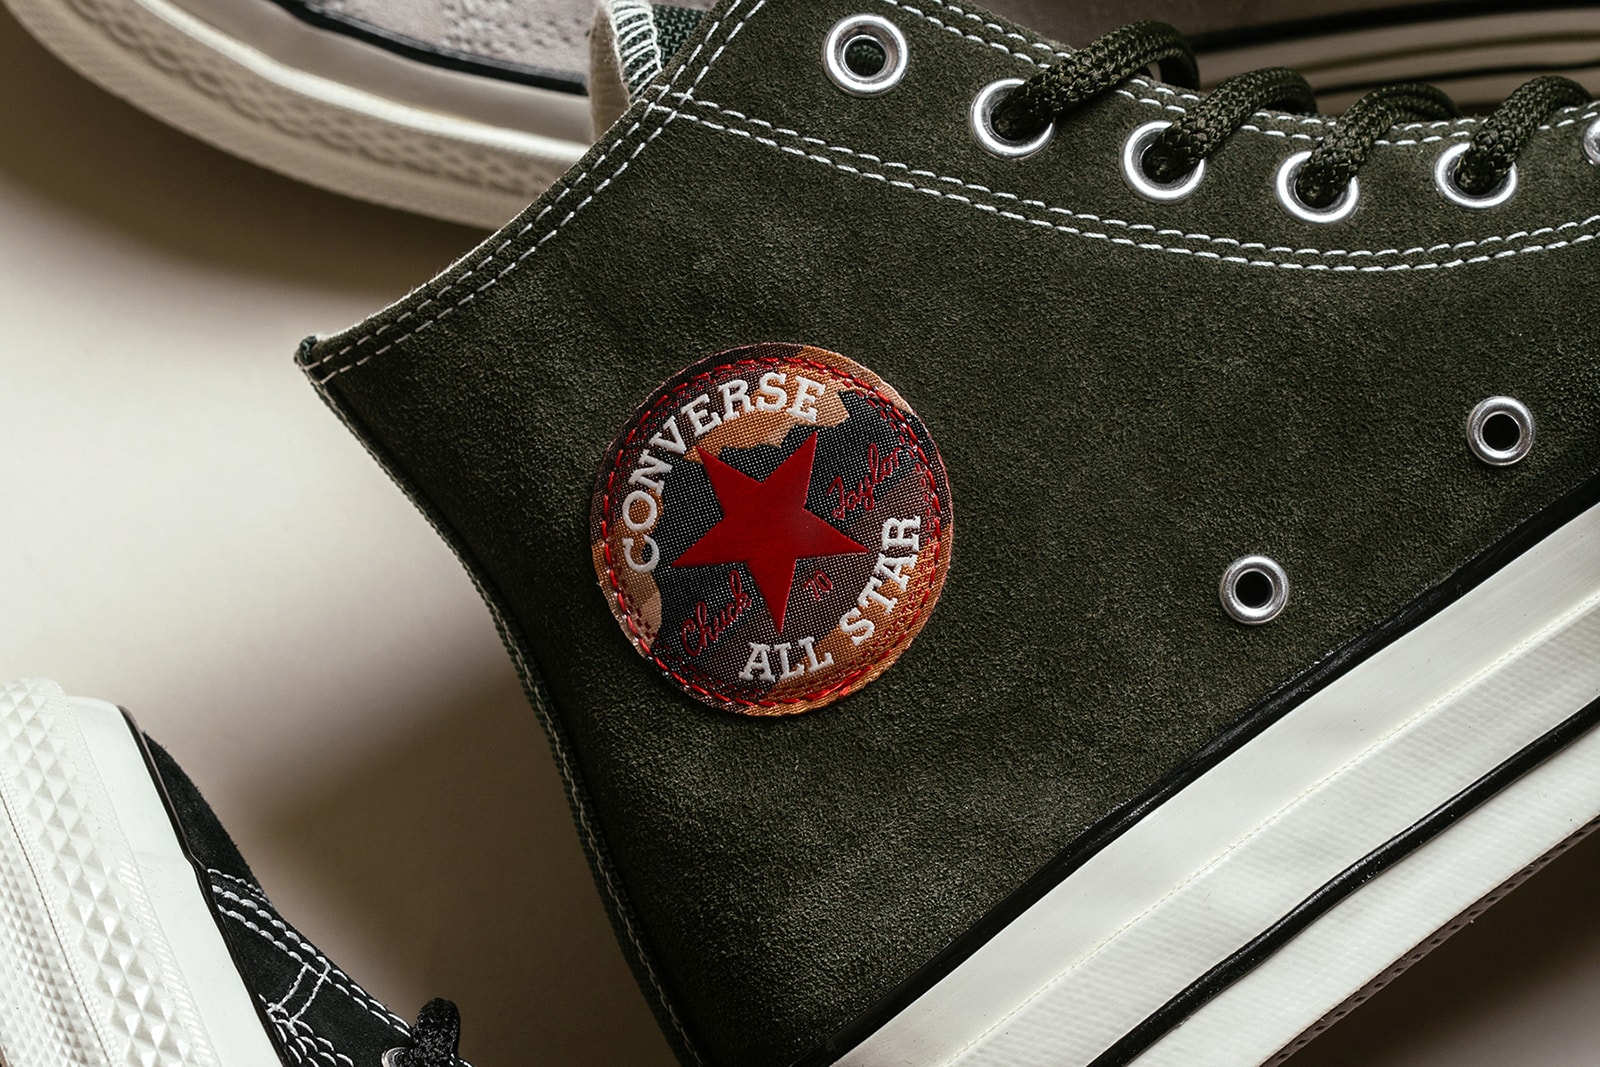 Converse Chuck Taylor All Star 70 Hi "Suede" Pack release date utility green natural ivory black price september 2018